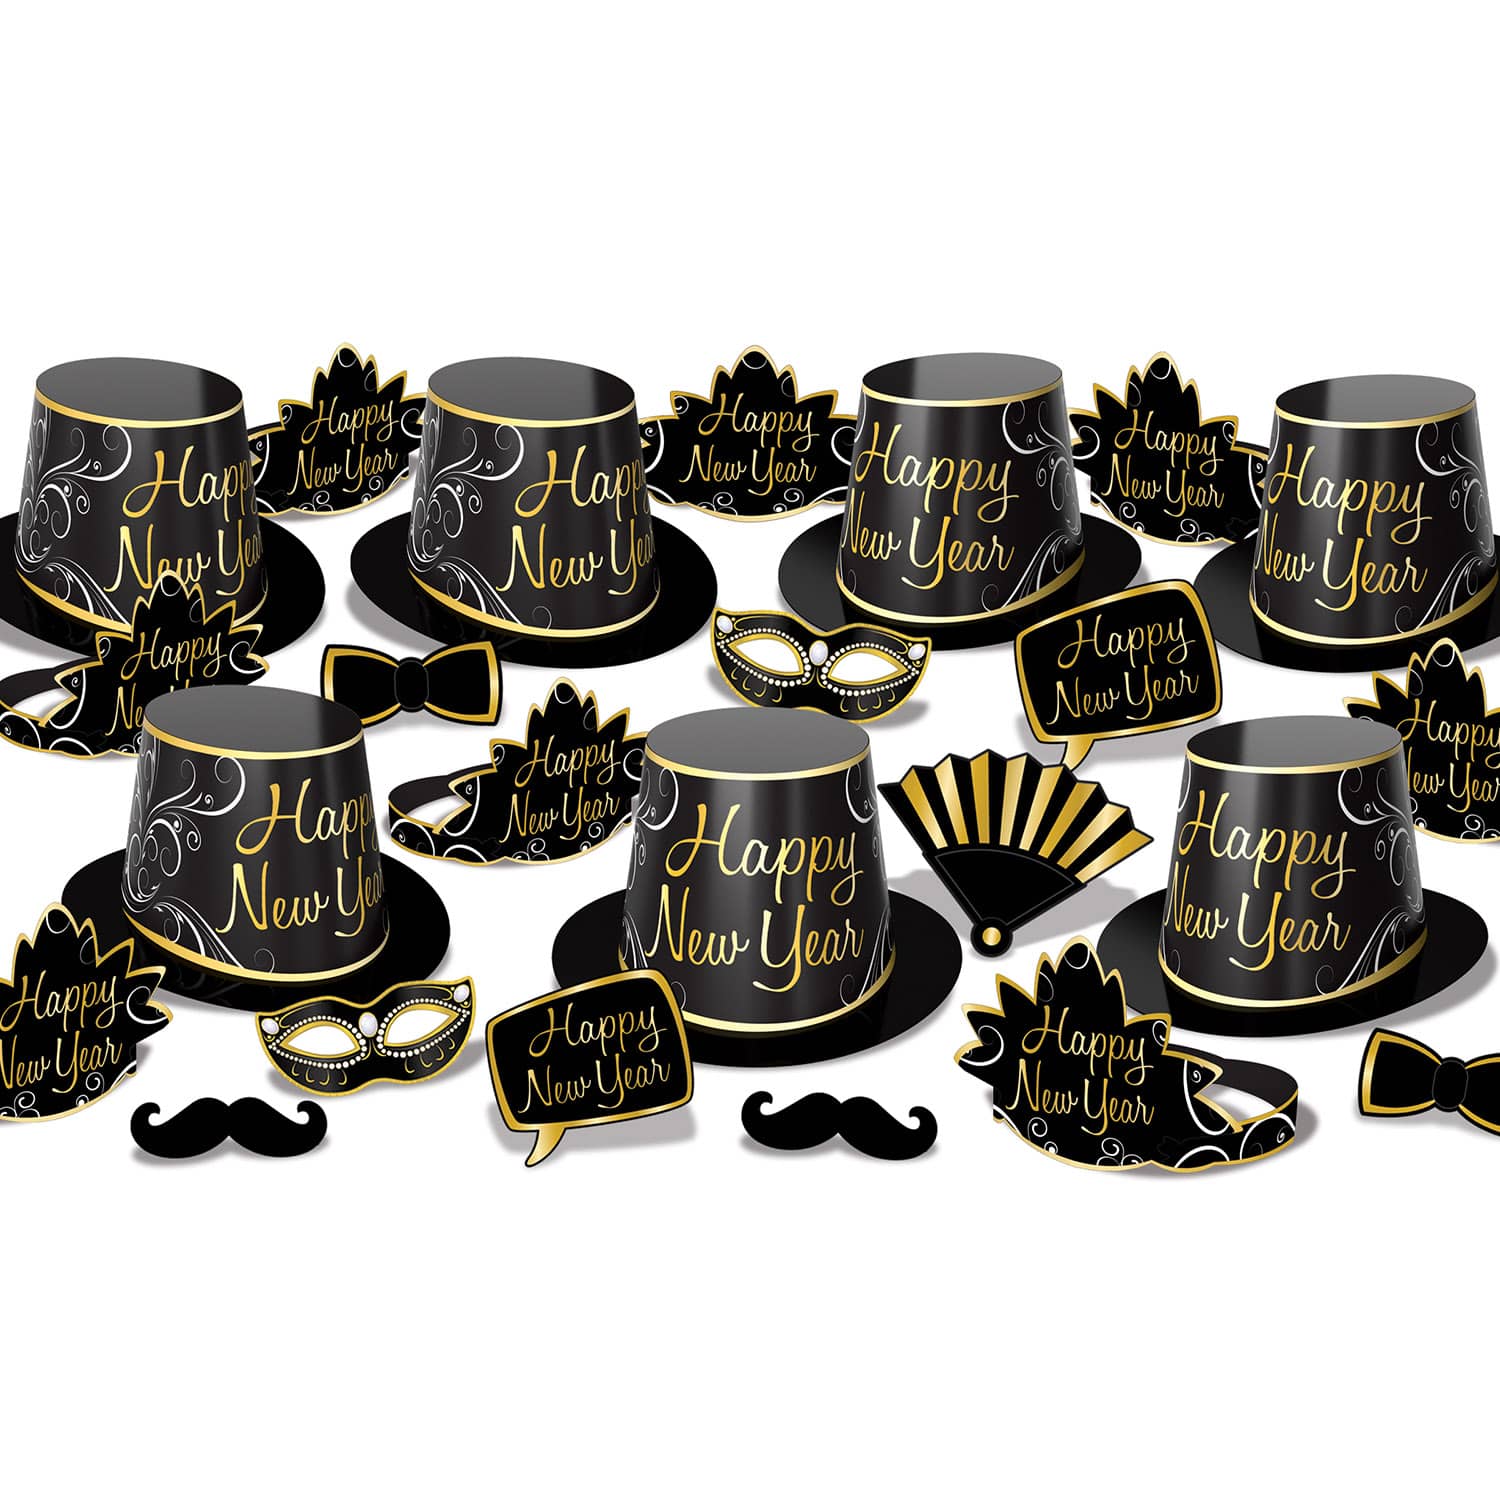 Simply Paper New Year Assortment for 50 - Black & Gold Simply Paper New Year Assortment for 50, 2022, eco friendly, paper product, new years eve, party kit, hat, tiara, photo fun signs, wholesale, inexpensive, bulk, party favor